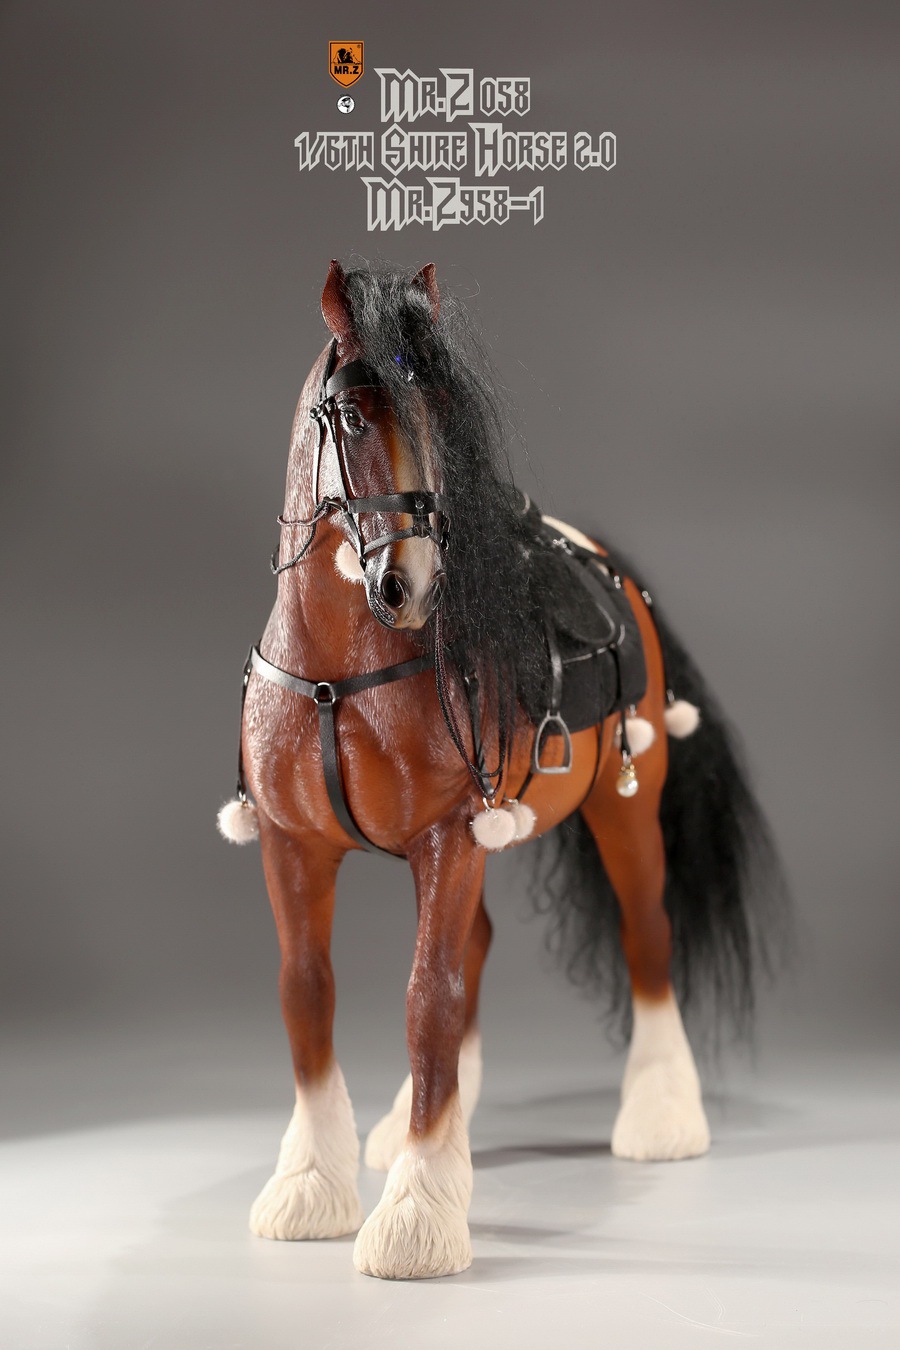 Mr - NEW PRODUCT: MR. Z: 58th round-Shire Horse 2.0 version full set of 5 colors  08573811